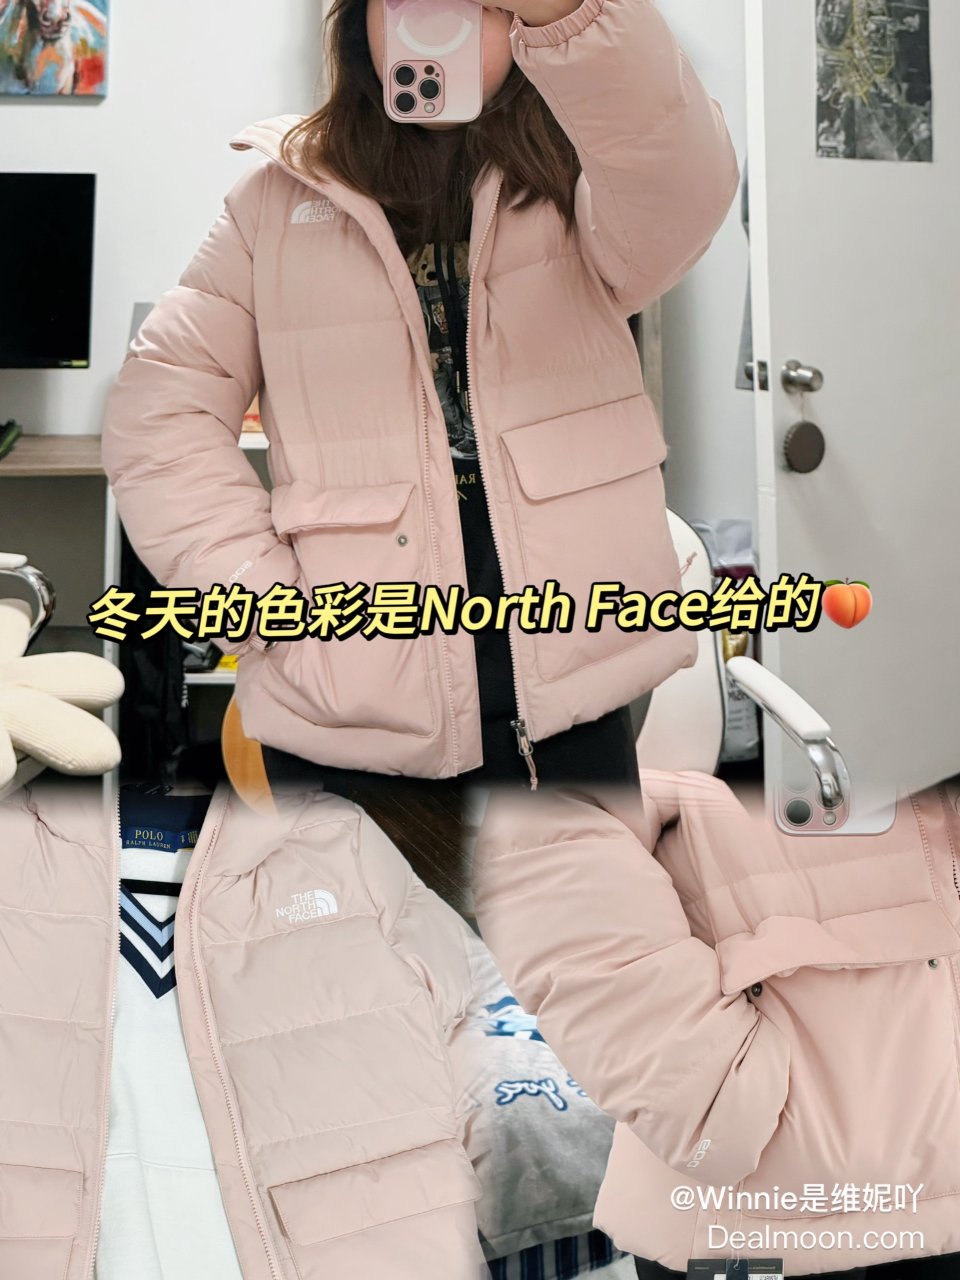 The North Face｜为冬天增加...